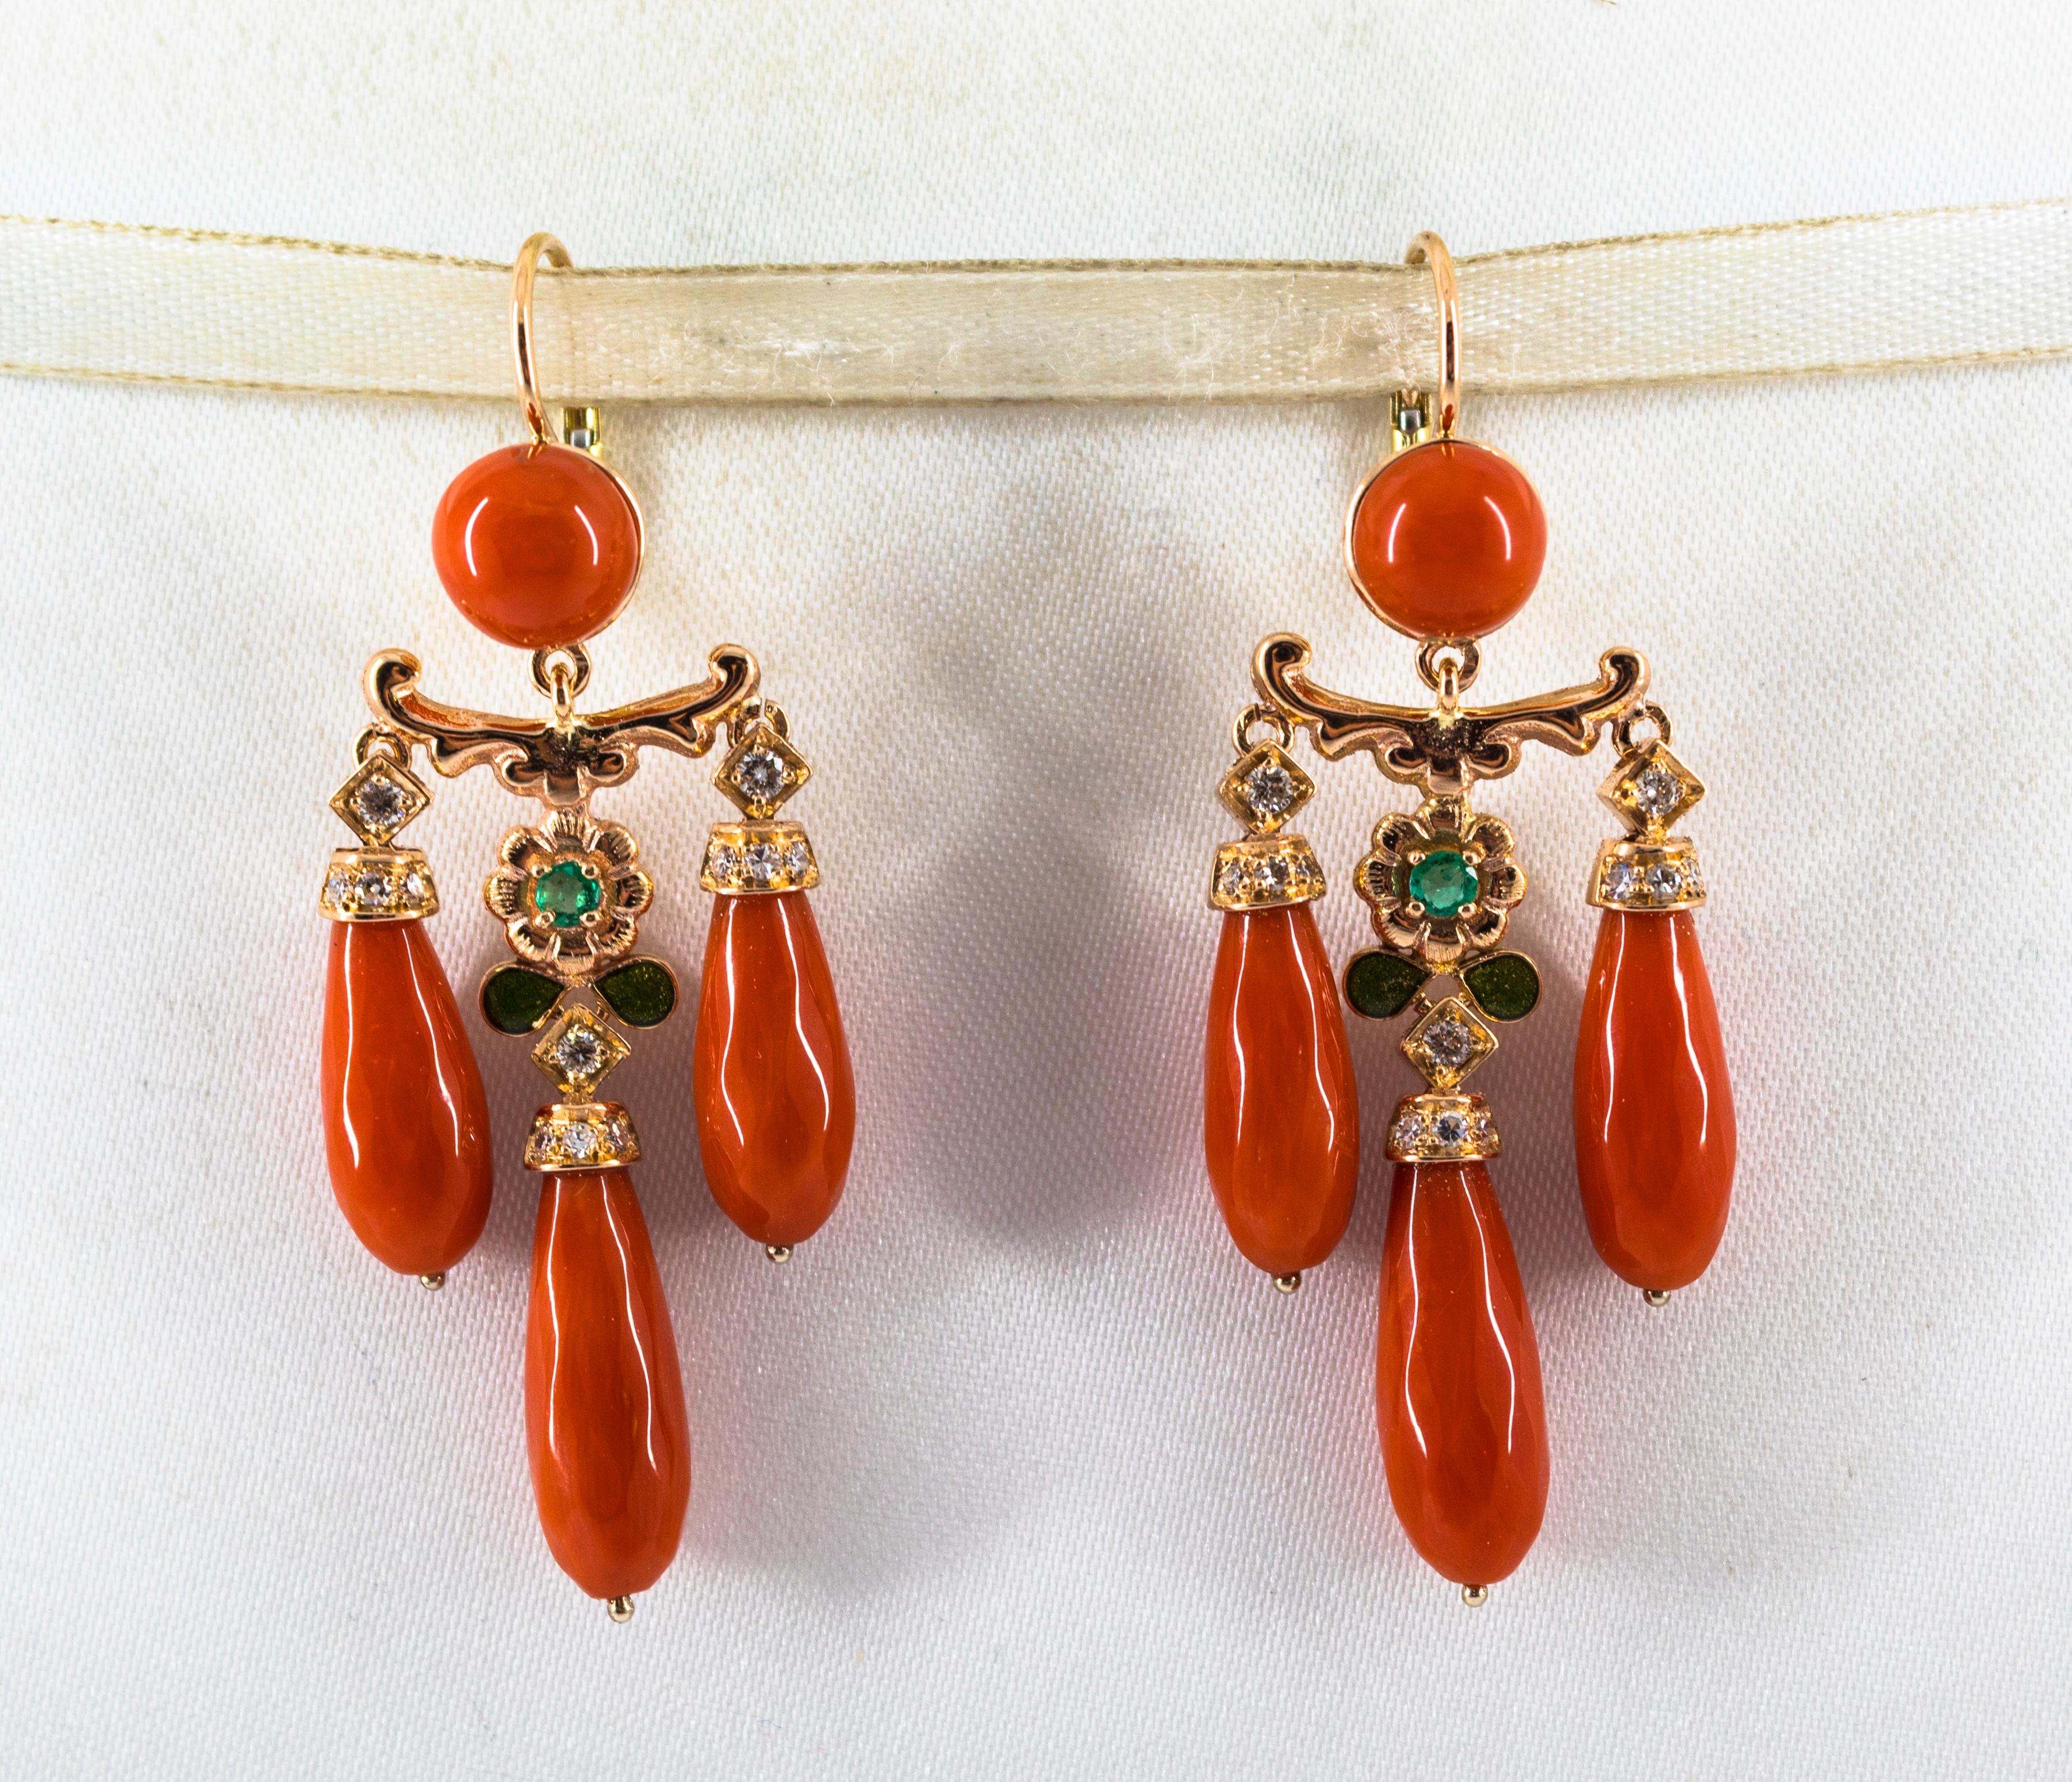 These Lever-Back Earrings are made of 14K Yellow Gold.
These Earrings have 0.26 Carats of White Diamonds.
These Earrings have 0.18 Carats of Emeralds.
These Earrings have Red Mediterranean (Sardinia, Italy) Coral and Enamel.
All our Earrings have